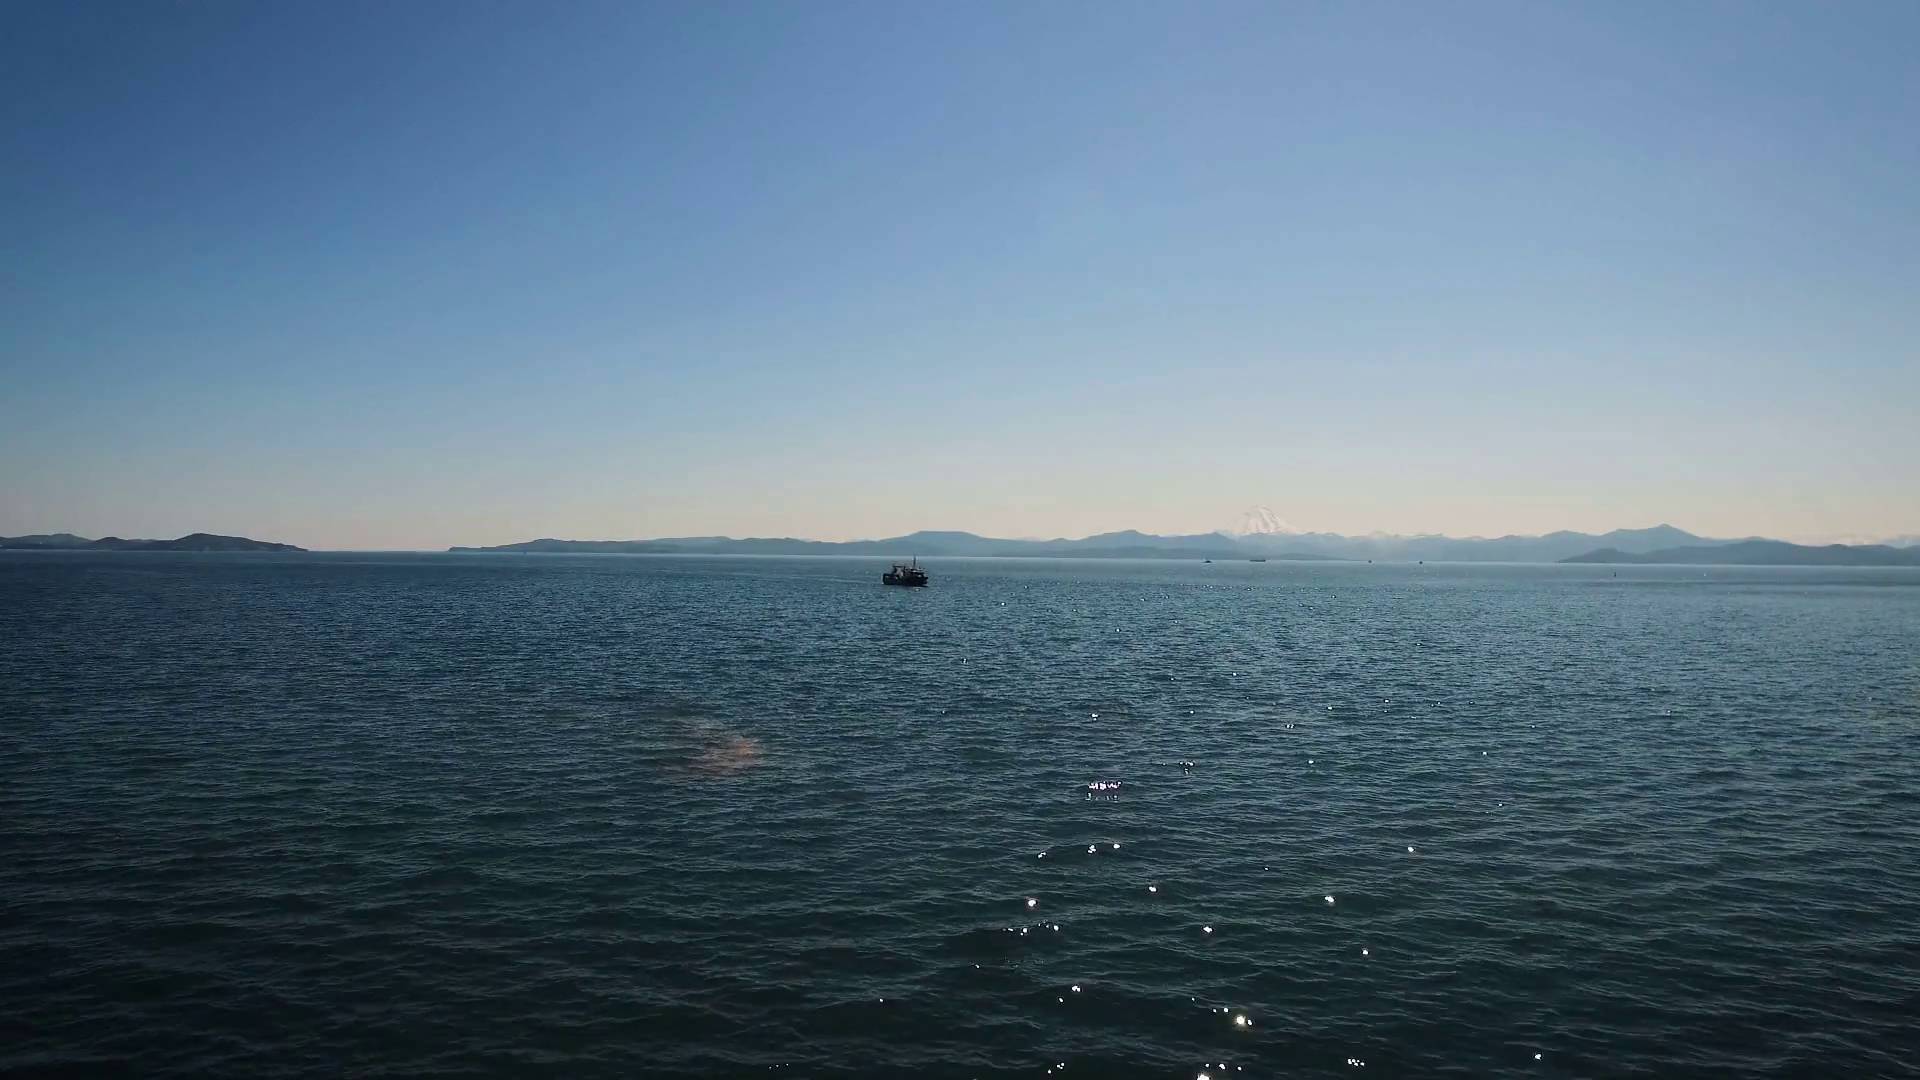 View of the lonely ship in the sea. The Bay and mountains in the ...